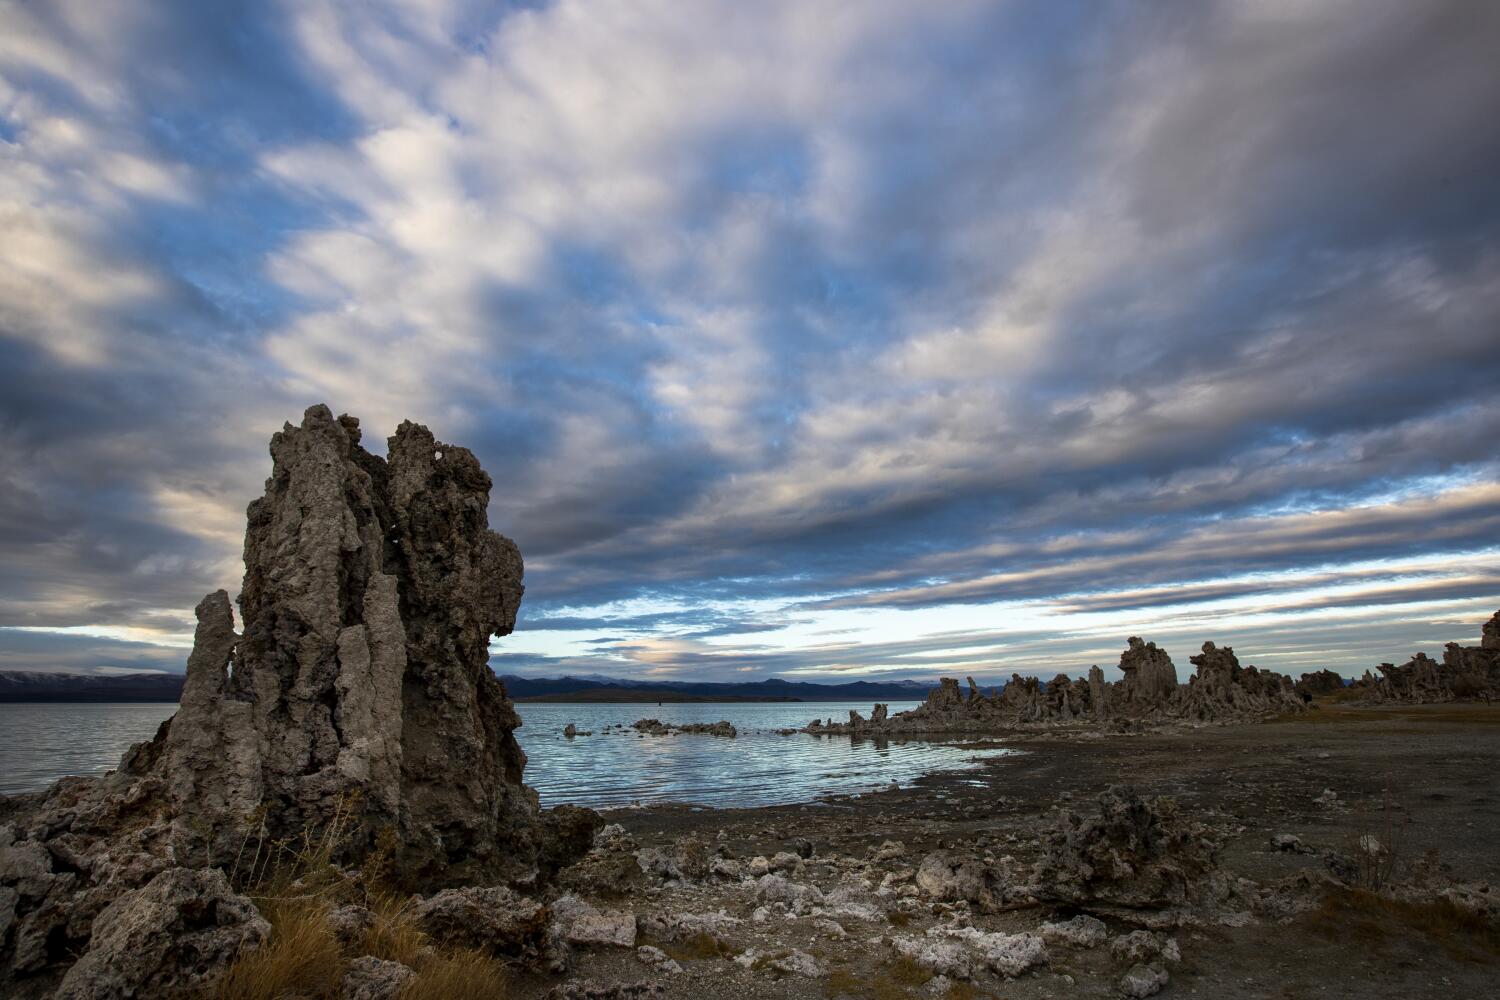 Image for display with article titled As Los Angeles Plans to Take Less Water, Environmentalists Celebrate a Win for Mono Lake